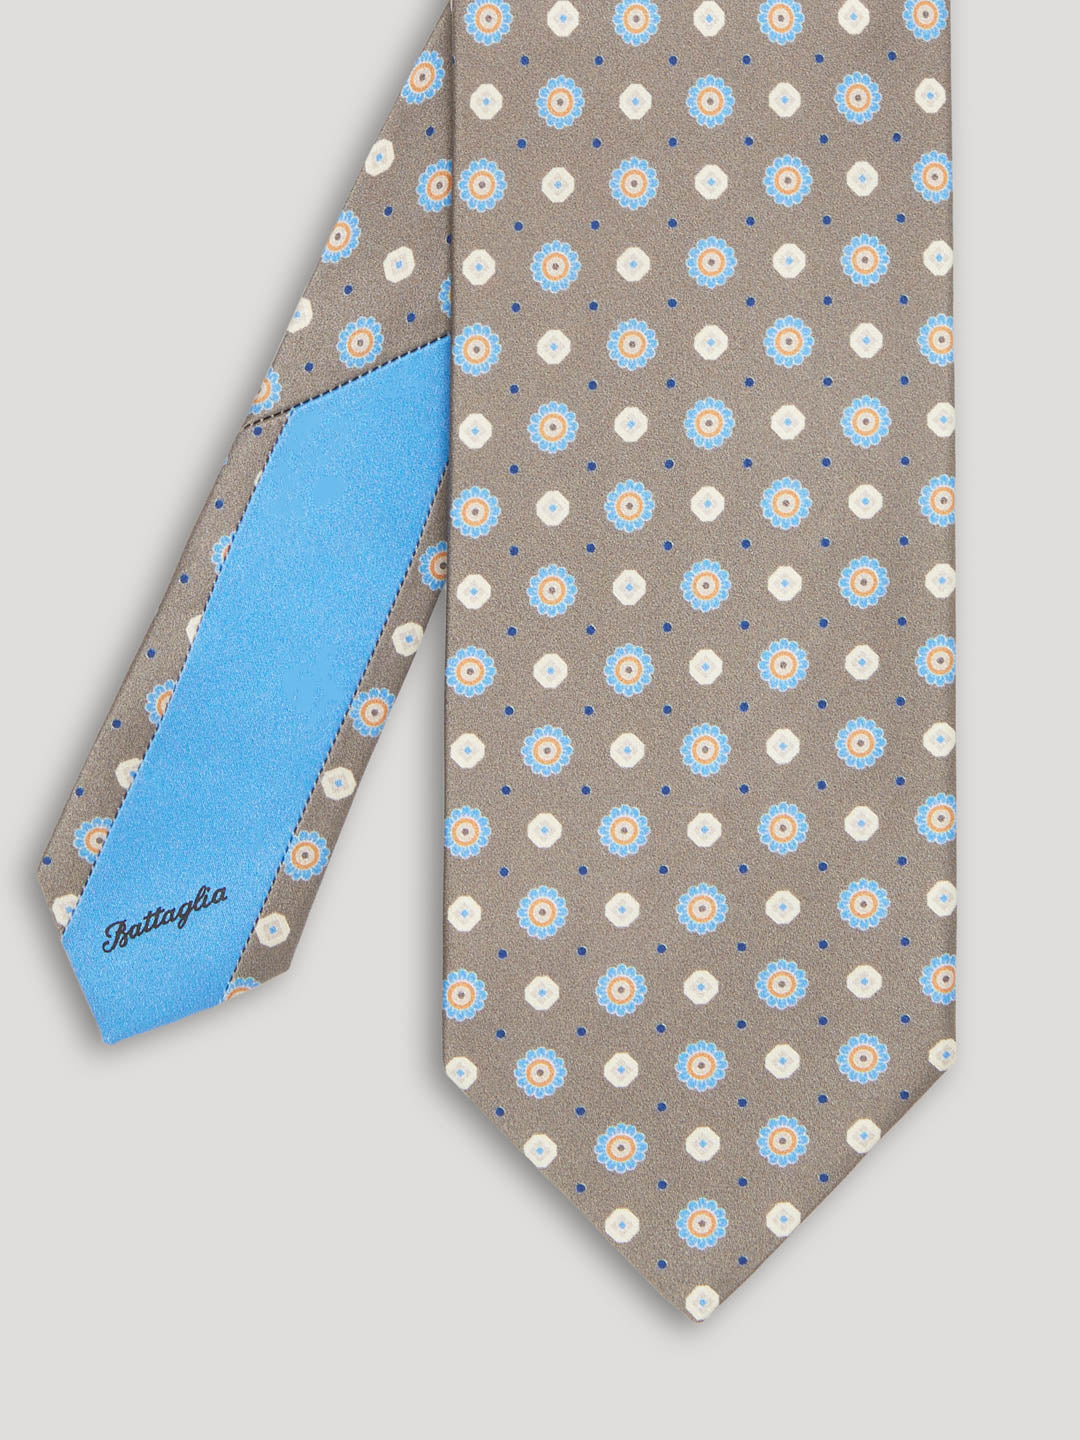 White grey beige and blue tie with large pattern